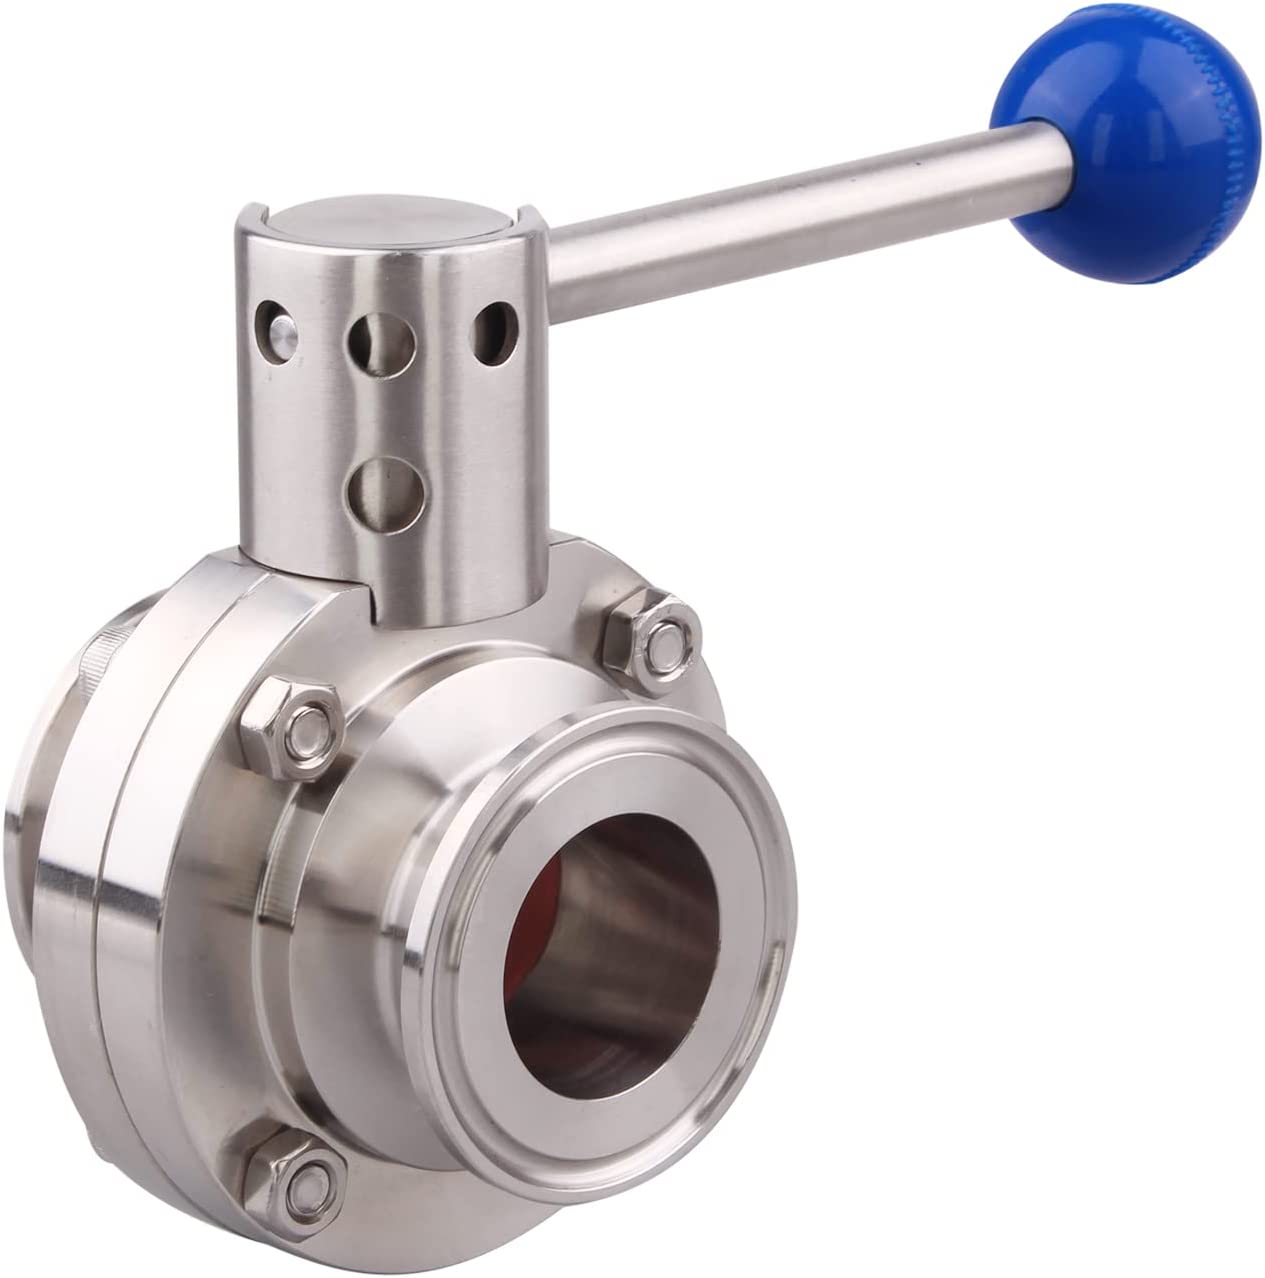 2 Sanitary Safety Valve Butterfly Valve with Pull Handle 304 Stainless Steel Tri Clamp (2.5" Tube OD)